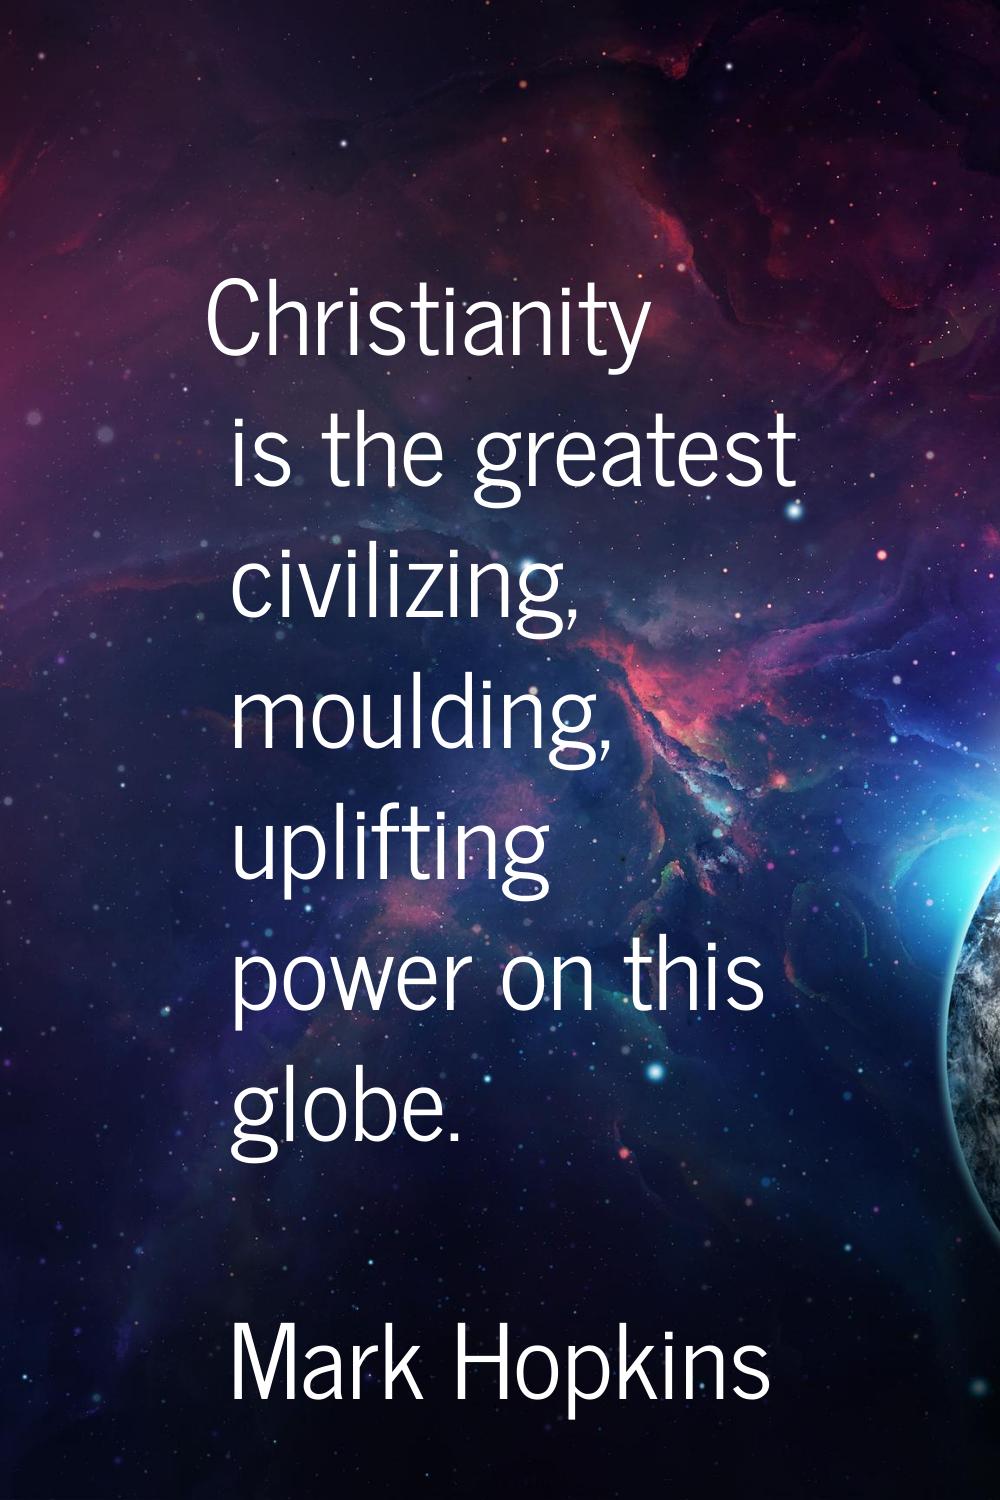 Christianity is the greatest civilizing, moulding, uplifting power on this globe.